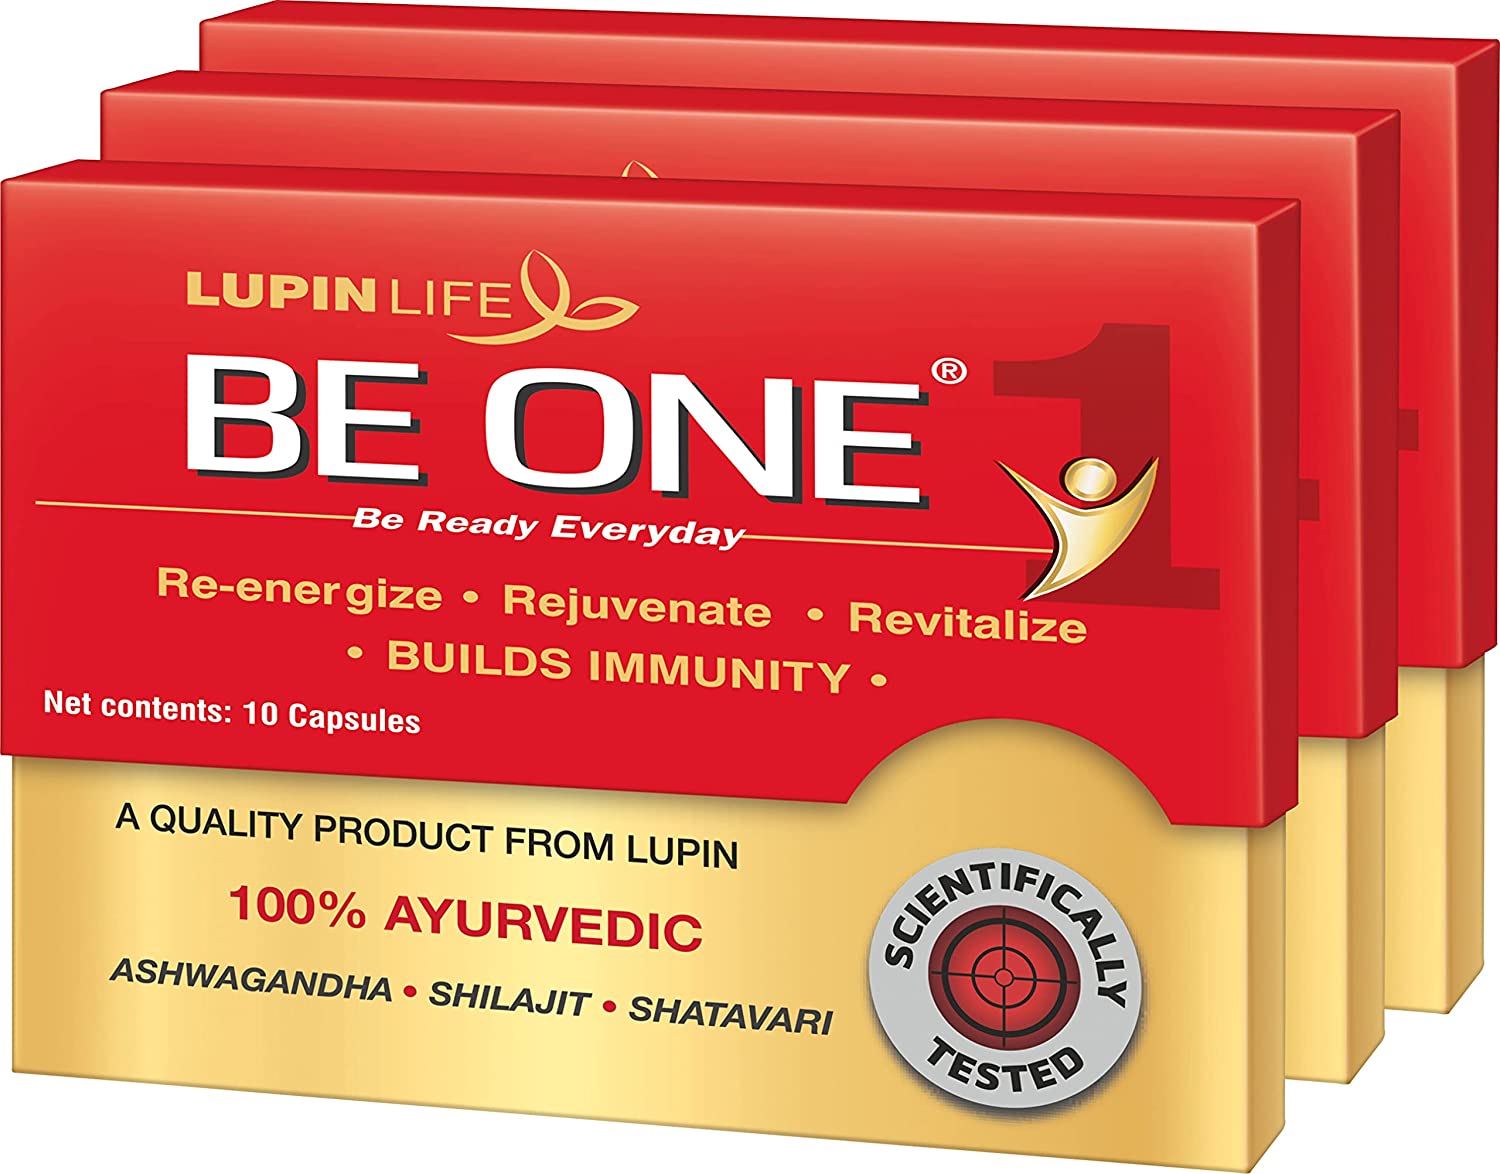 Buy Alternate Medicine and Healthcare Products Online, Lupin Life Be One  Capsule - 10 Capsules (Pack of 3)